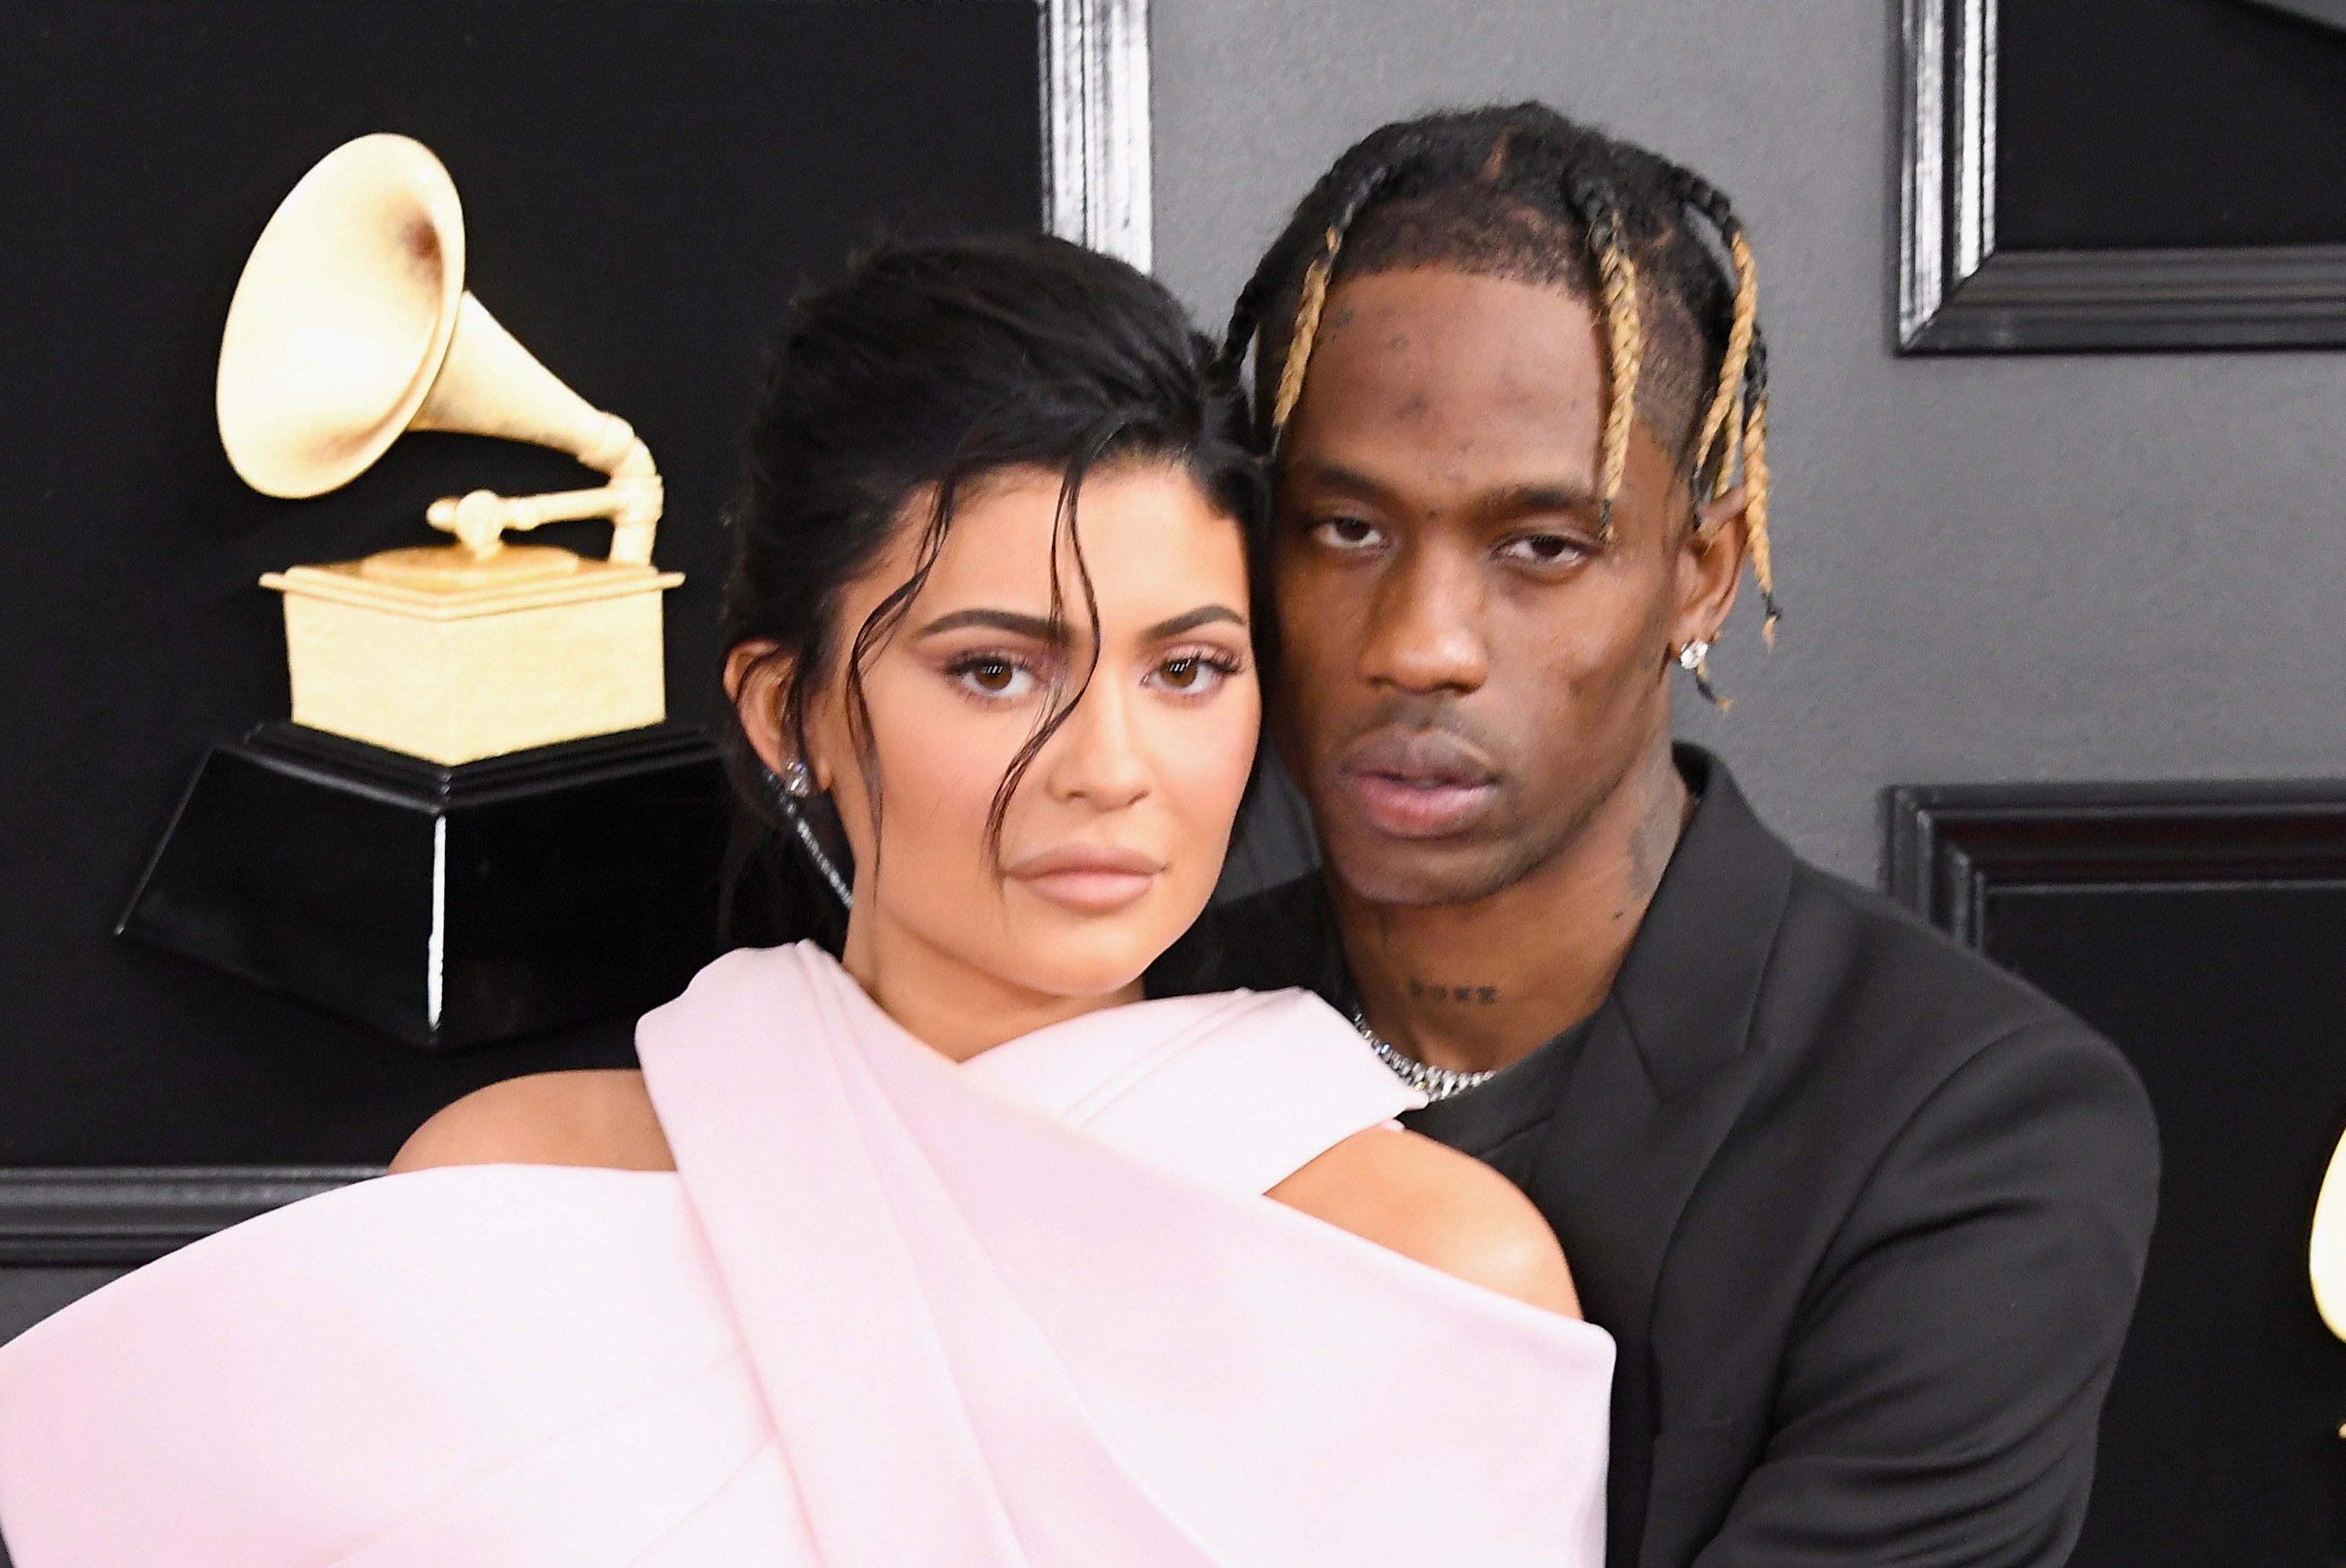 Kylie Jenner and Travis Scott attend the 61st Annual Grammy Awards at Staples Center on February 10, 2019, in Los Angeles